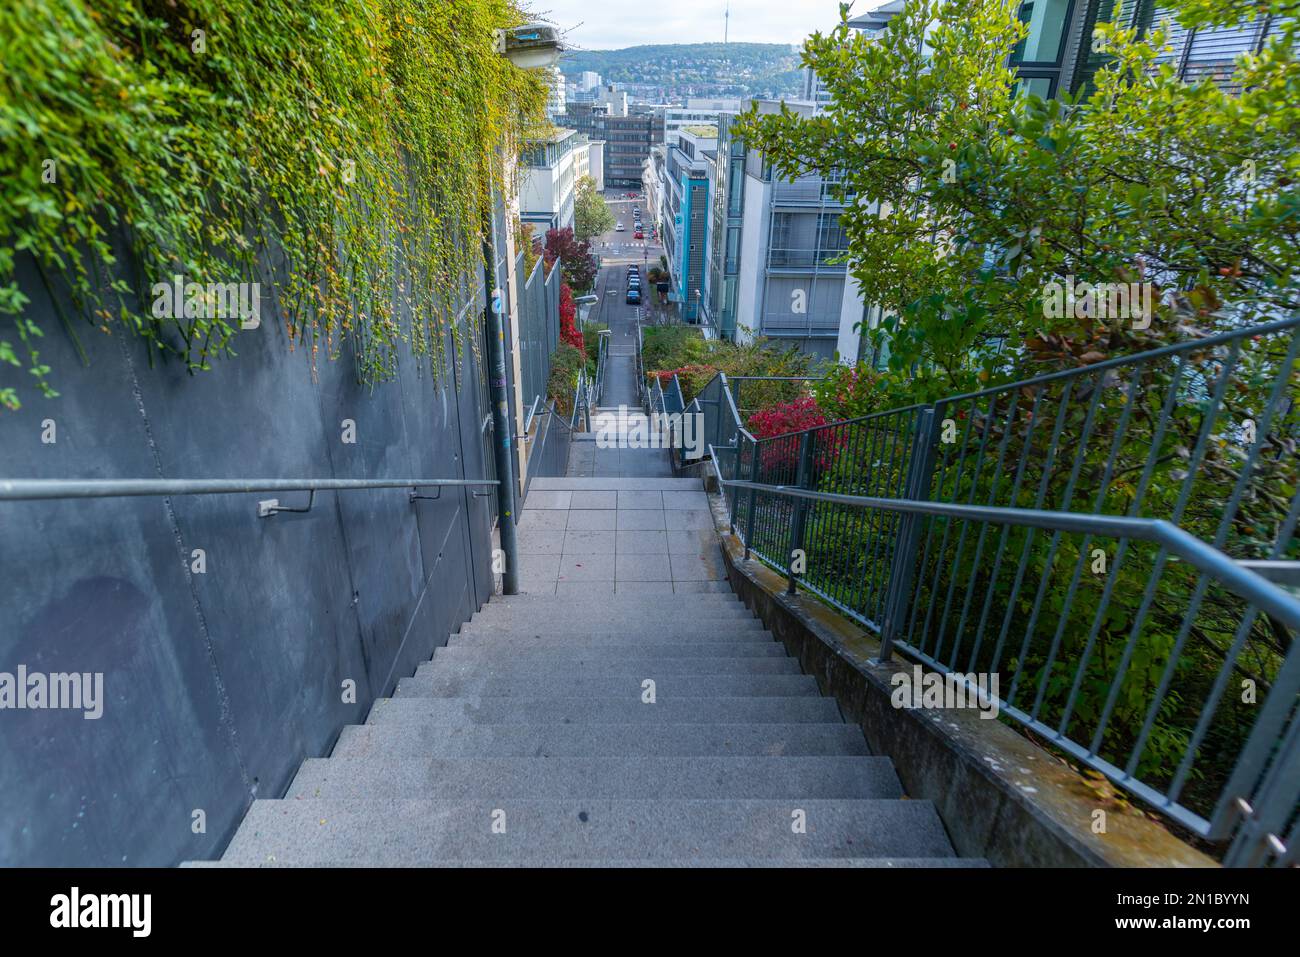 Kronenstaffel,Stuttgart  typical stairs leading up and down the slopes that surround the city, Stuttgart, Baden-Württemberg, Southern Germany, Europe Stock Photo